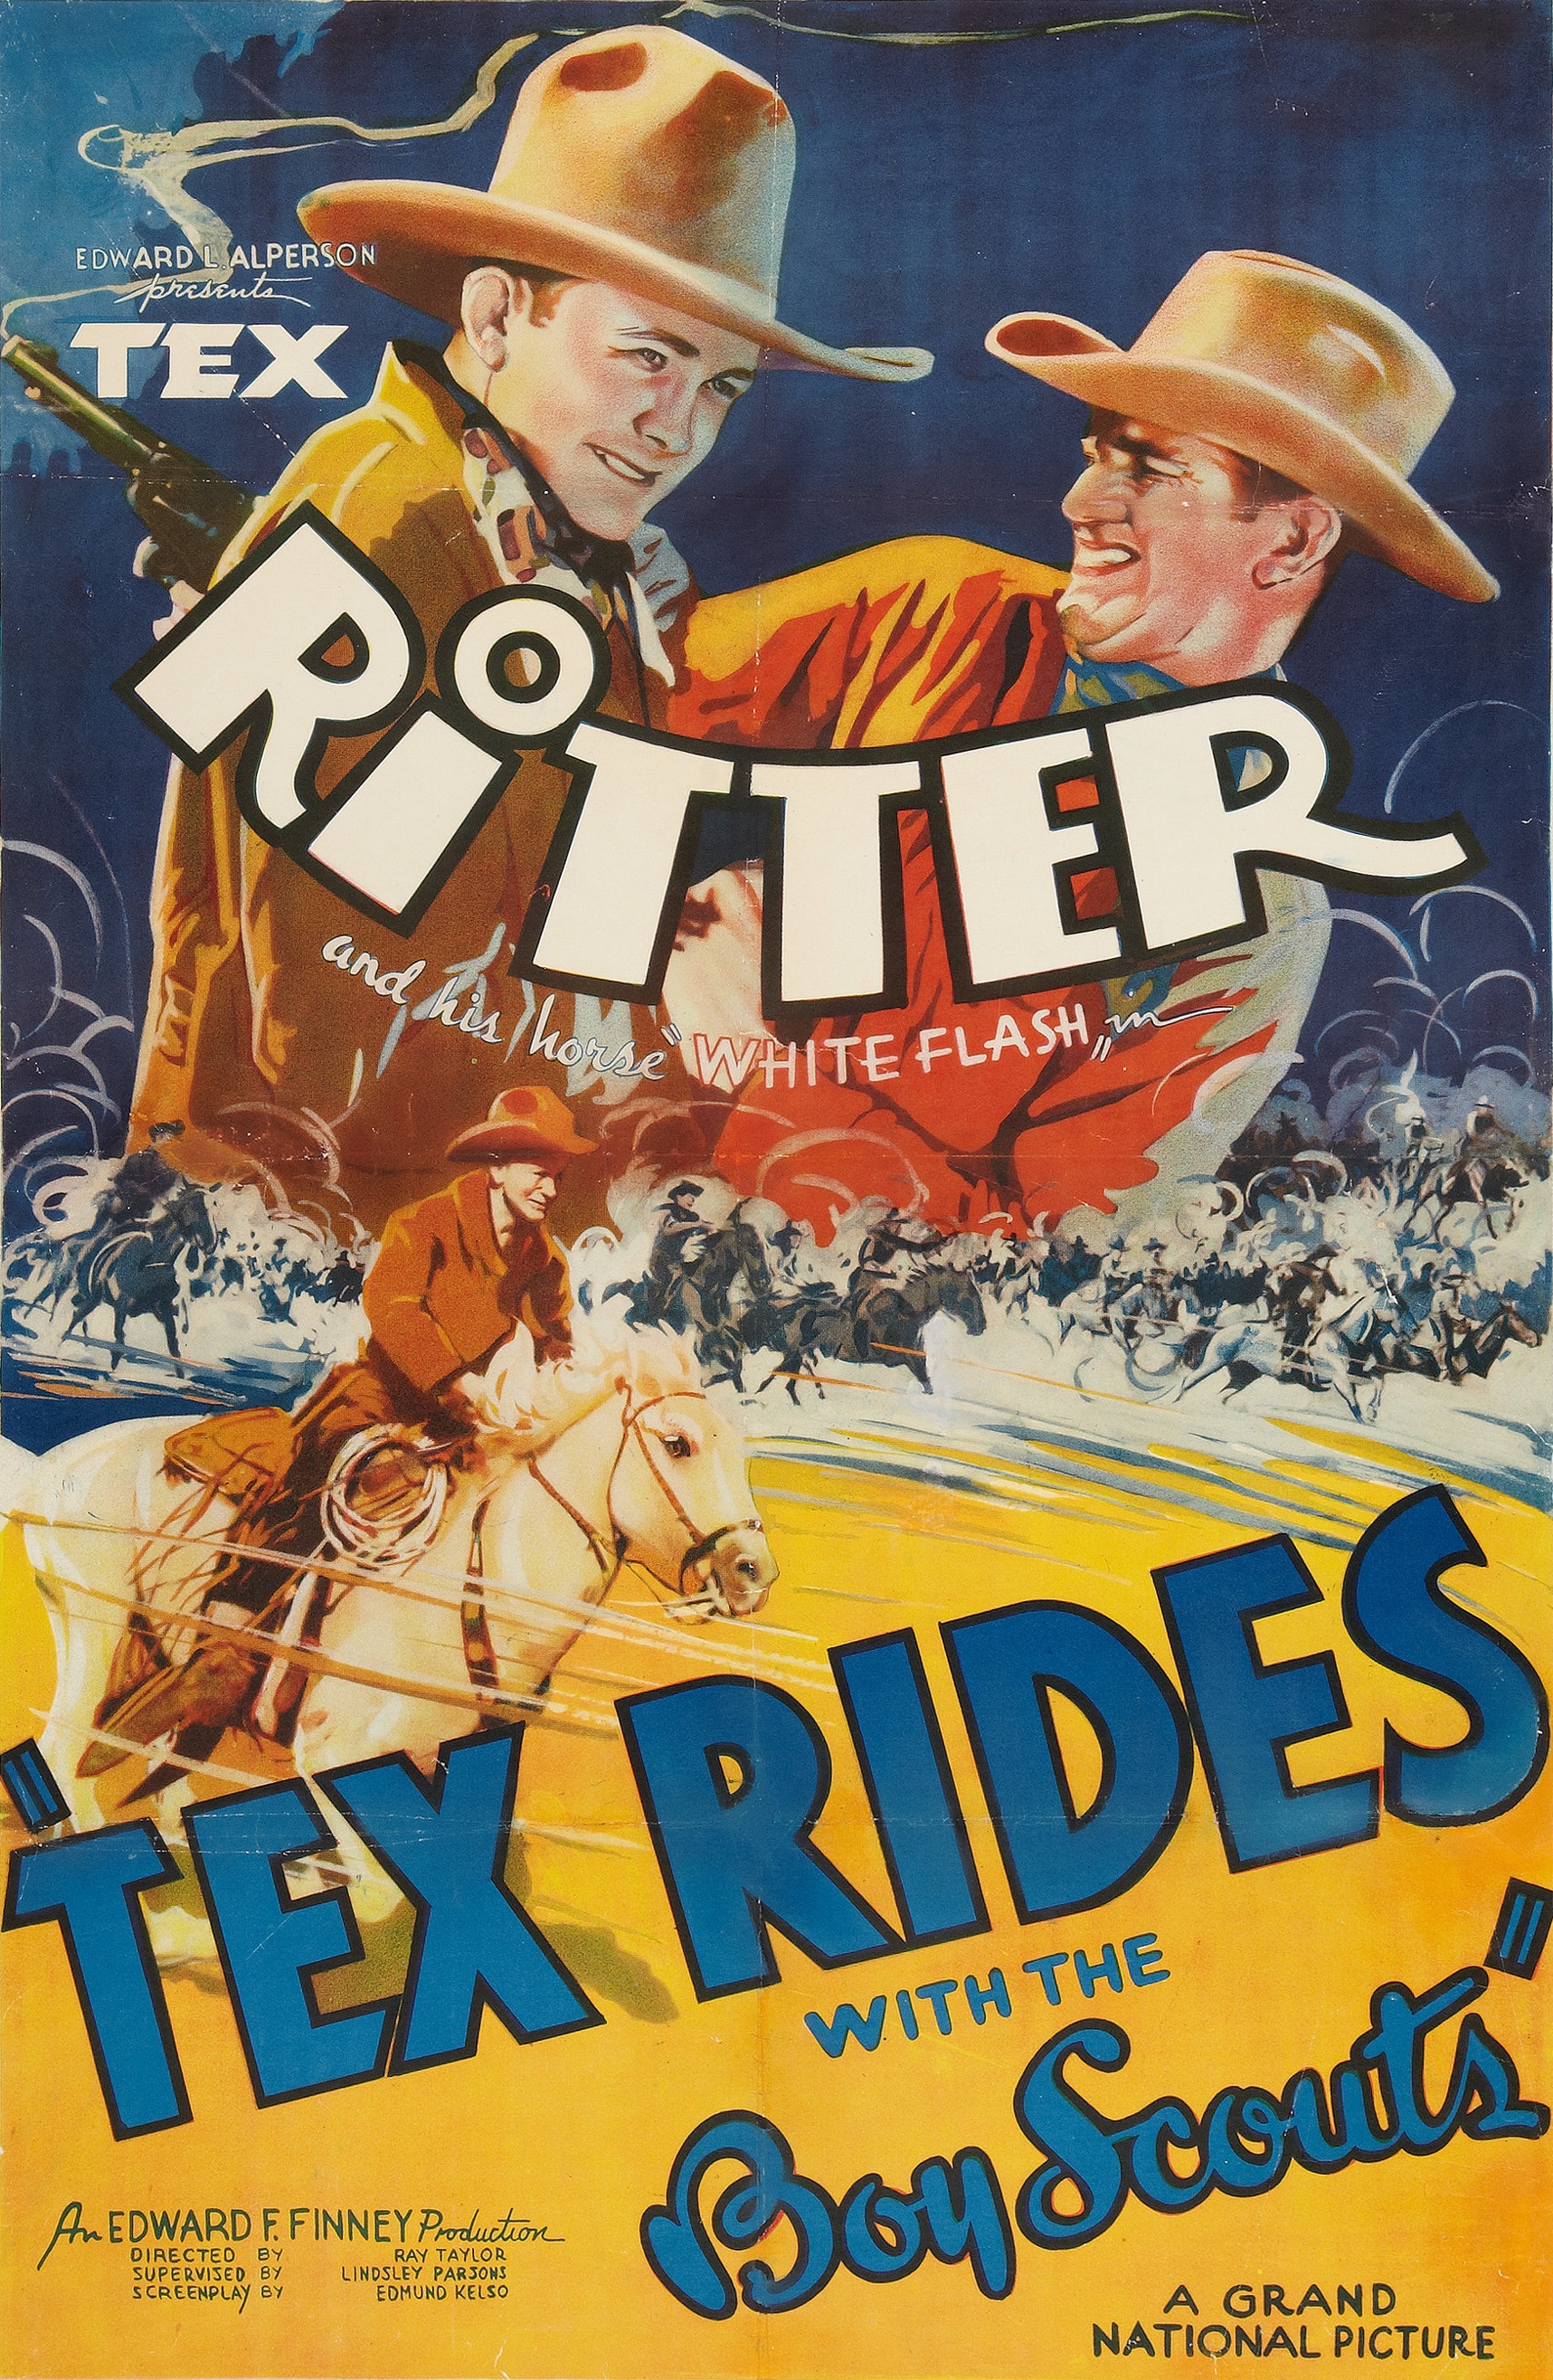 Tex Rides with the Boy Scouts (1937) Screenshot 2 